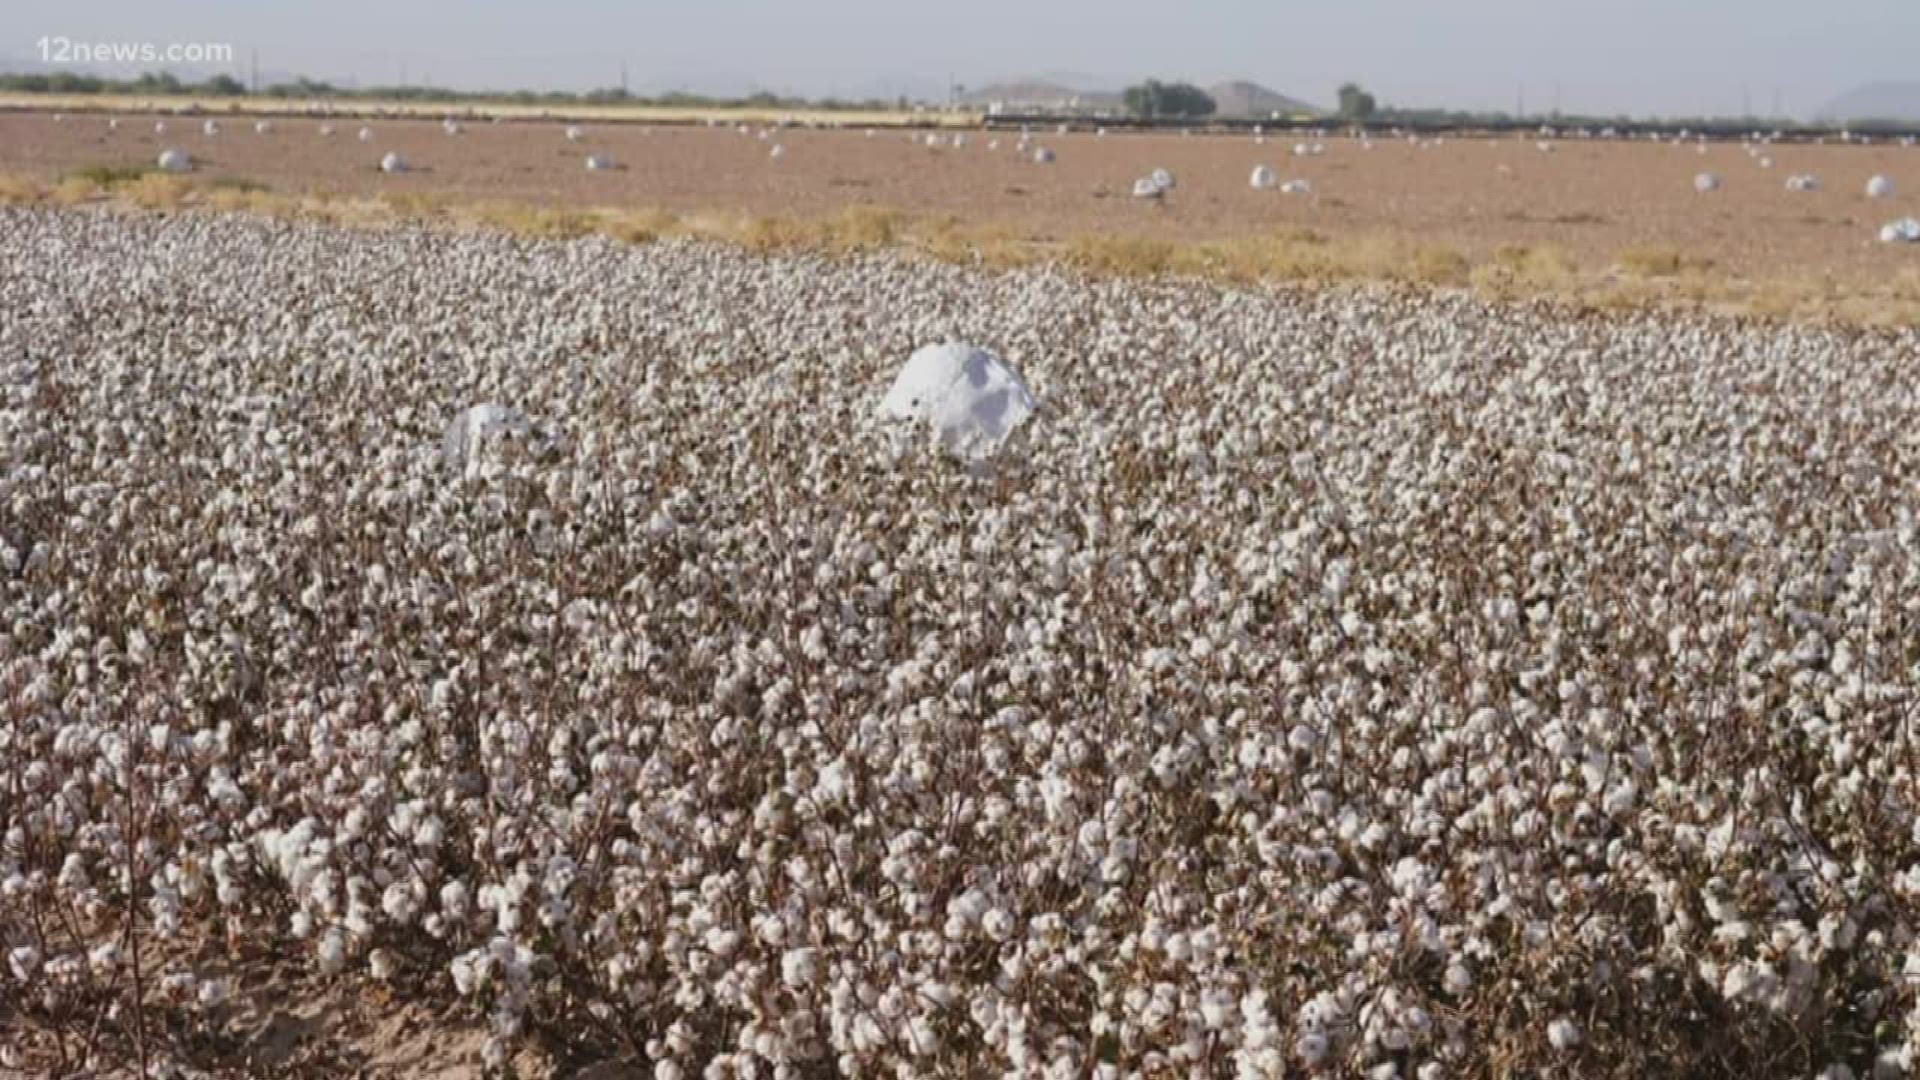 A farmer near the Pinal County fairgrounds says she is fed up with lanterns flying into her fields. The flaming lanterns posed a danger to her cotton fields.